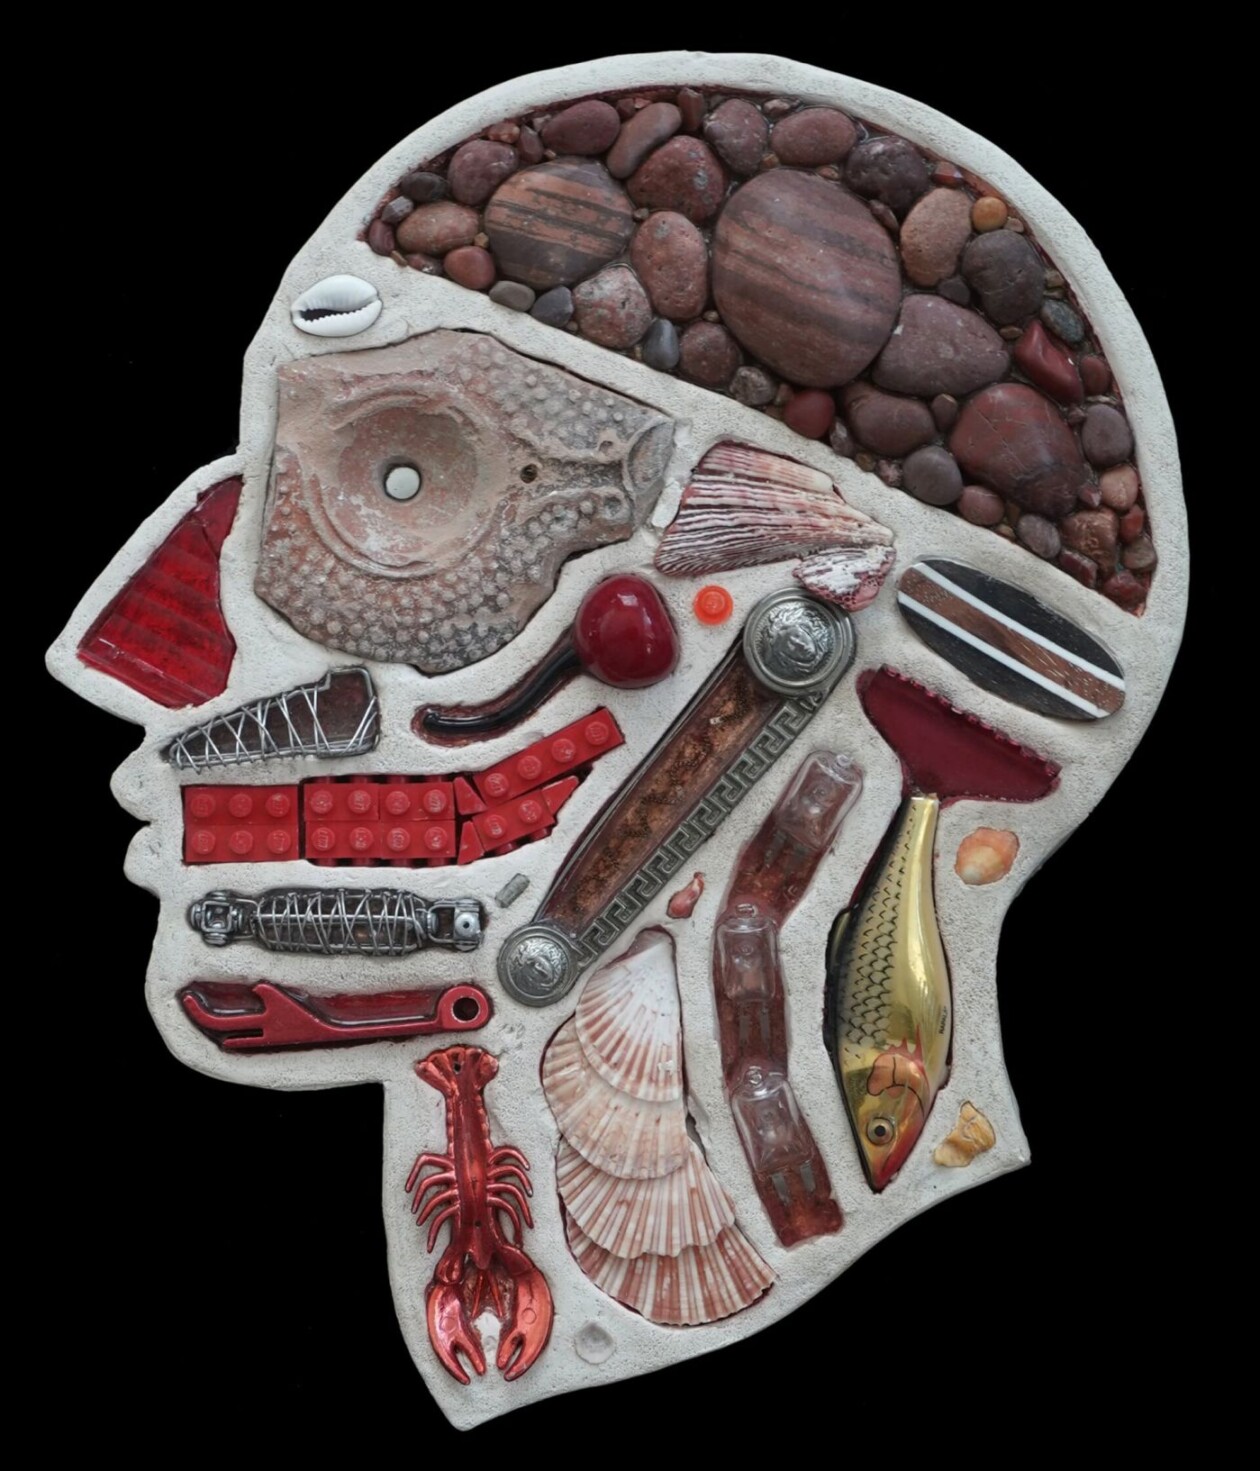 Assemblage Sculptures Of Anatomical Human Head Cross Sections By Edwige Massart And Xavier Wynn (9)